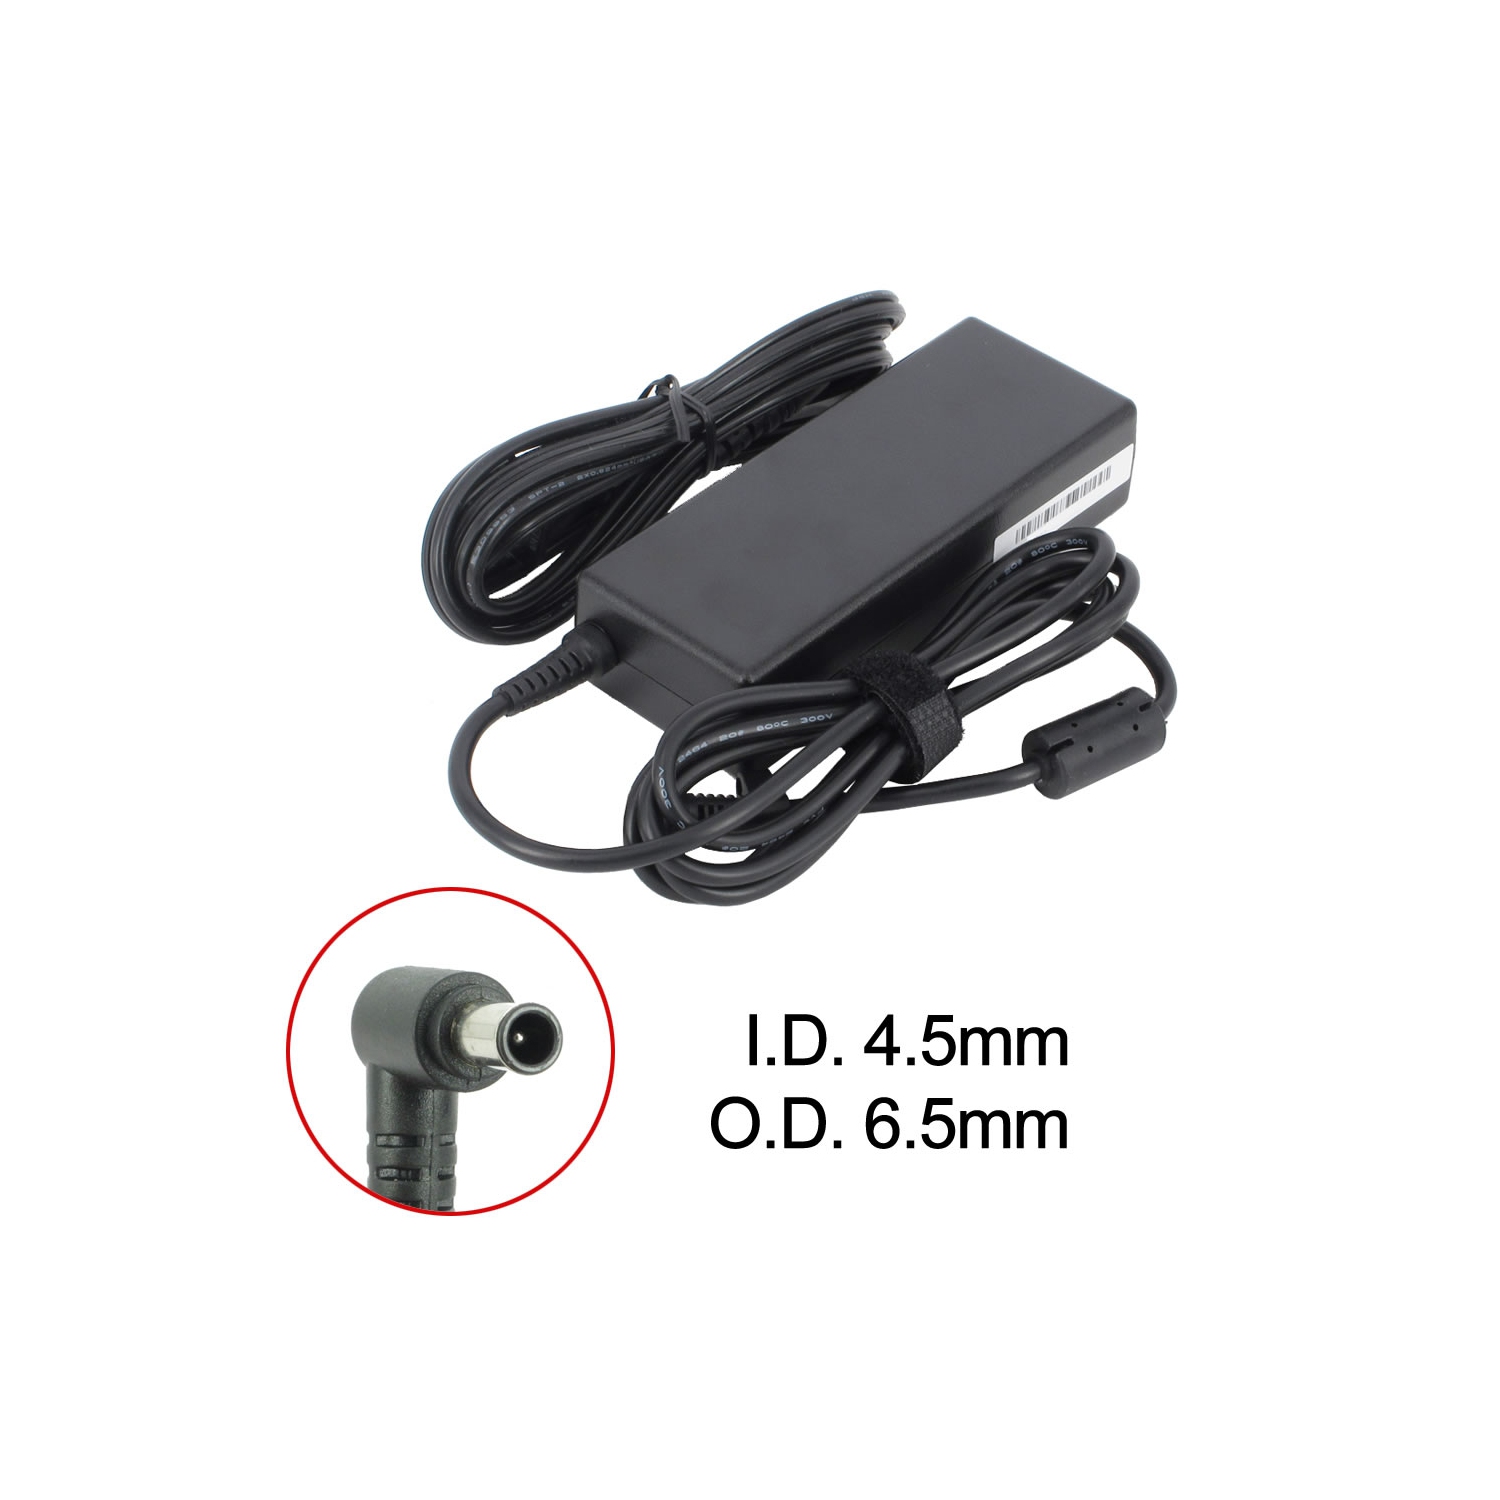 Brand New Laptop AC Adapter for Sony VAIO VGN-NW160J/S, PCGA-AC19V11, VGP-AC19V10, VGP-AC19V21, VGP-AC19V31, VGP-AC19V67